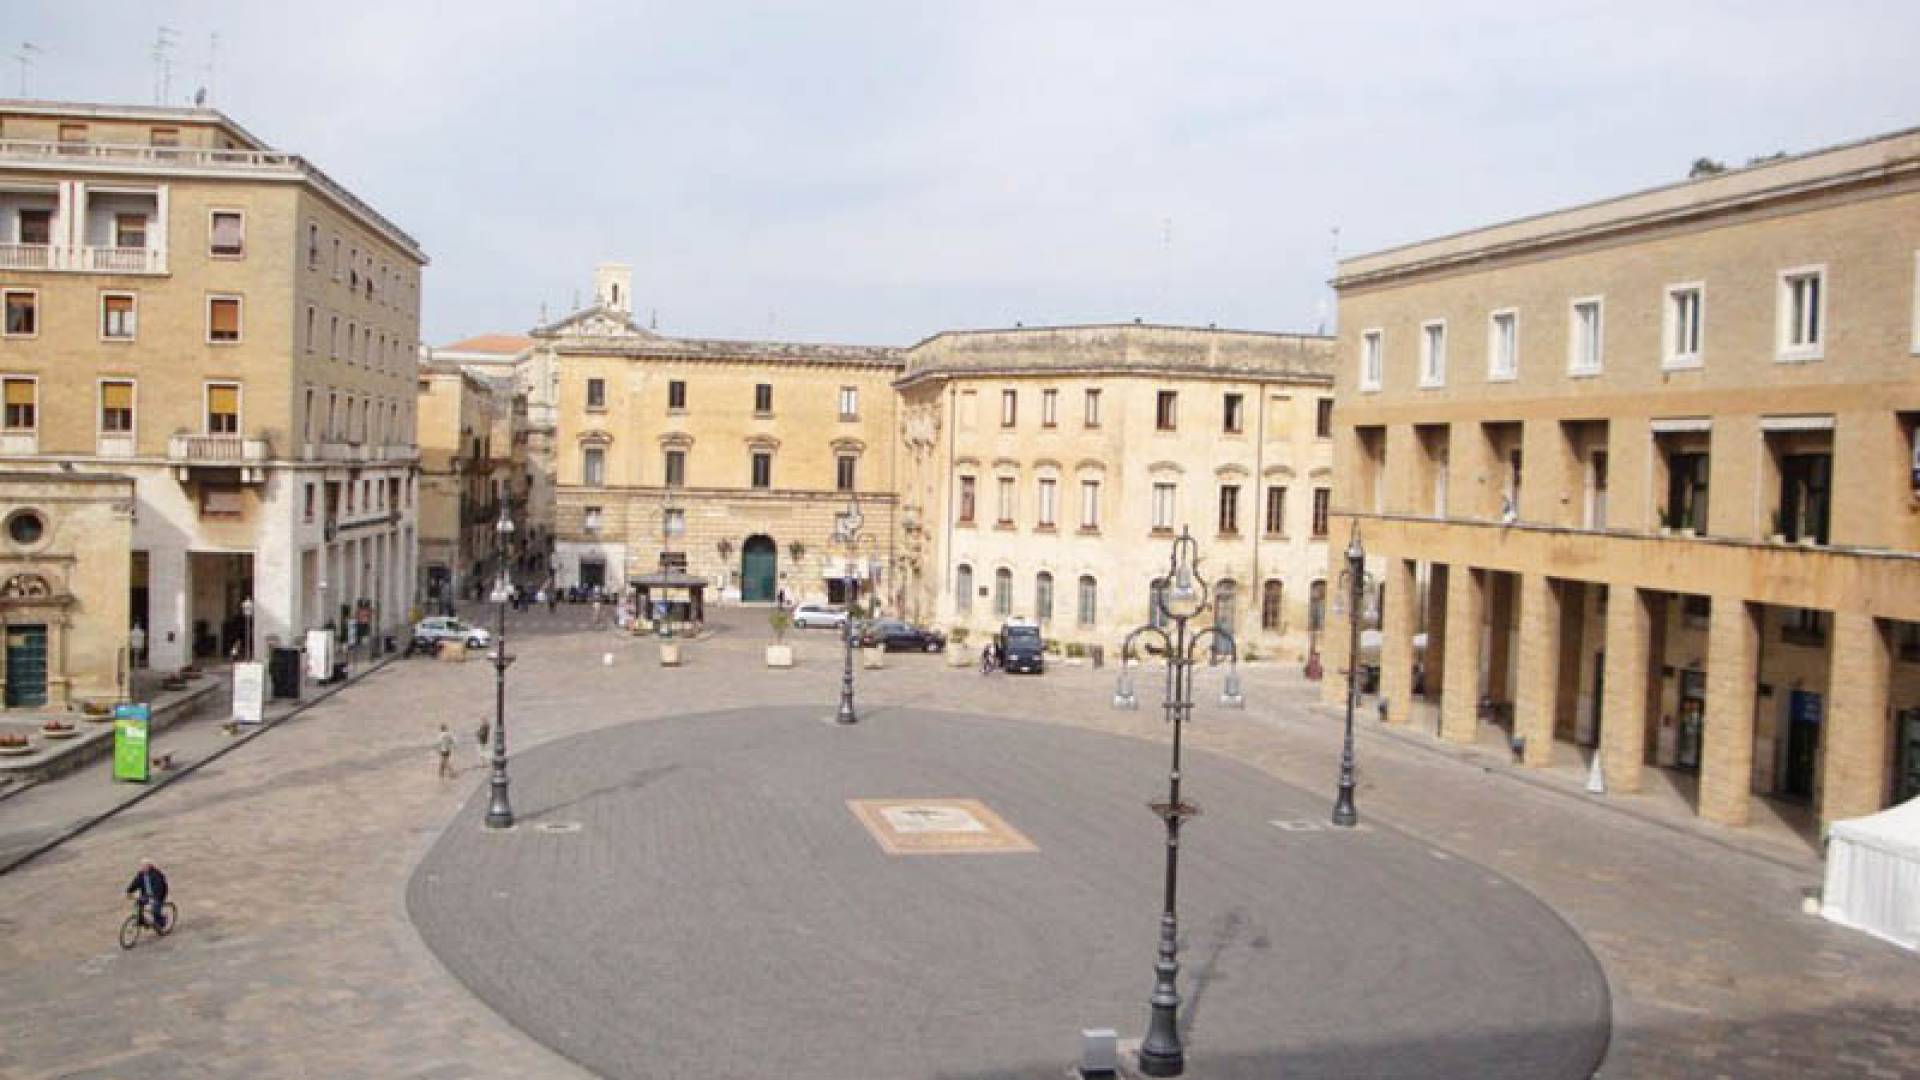 PIAZZA SANT'ORONZO, First Part